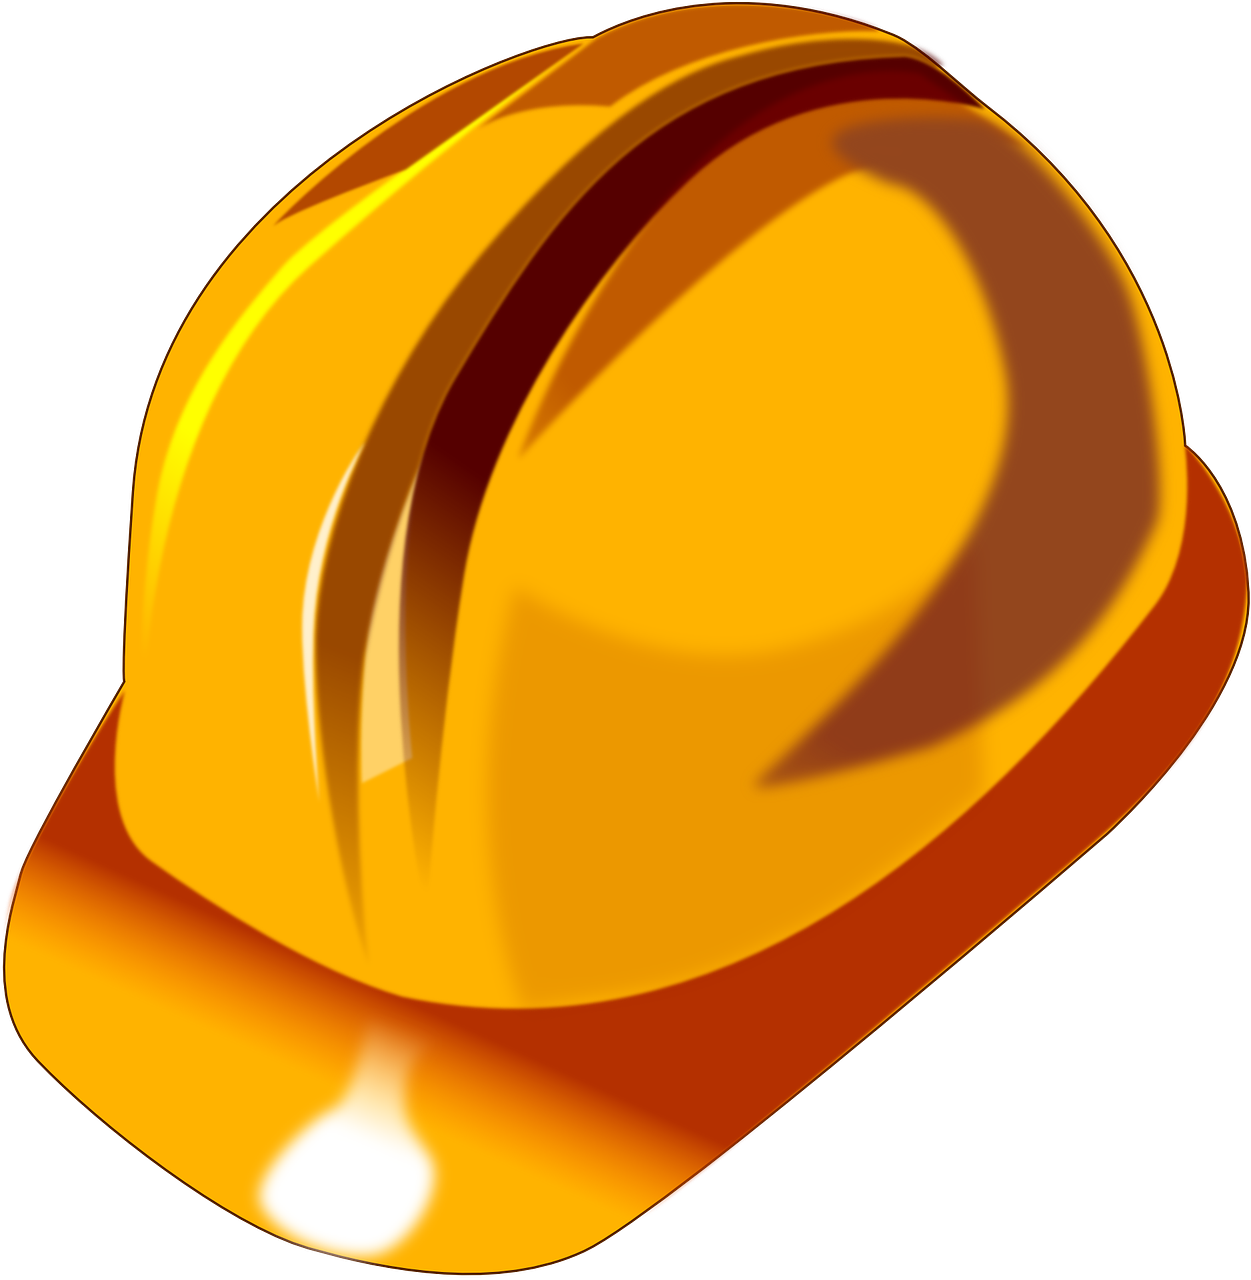 Helmet clipart builder. Construction contractors safety and